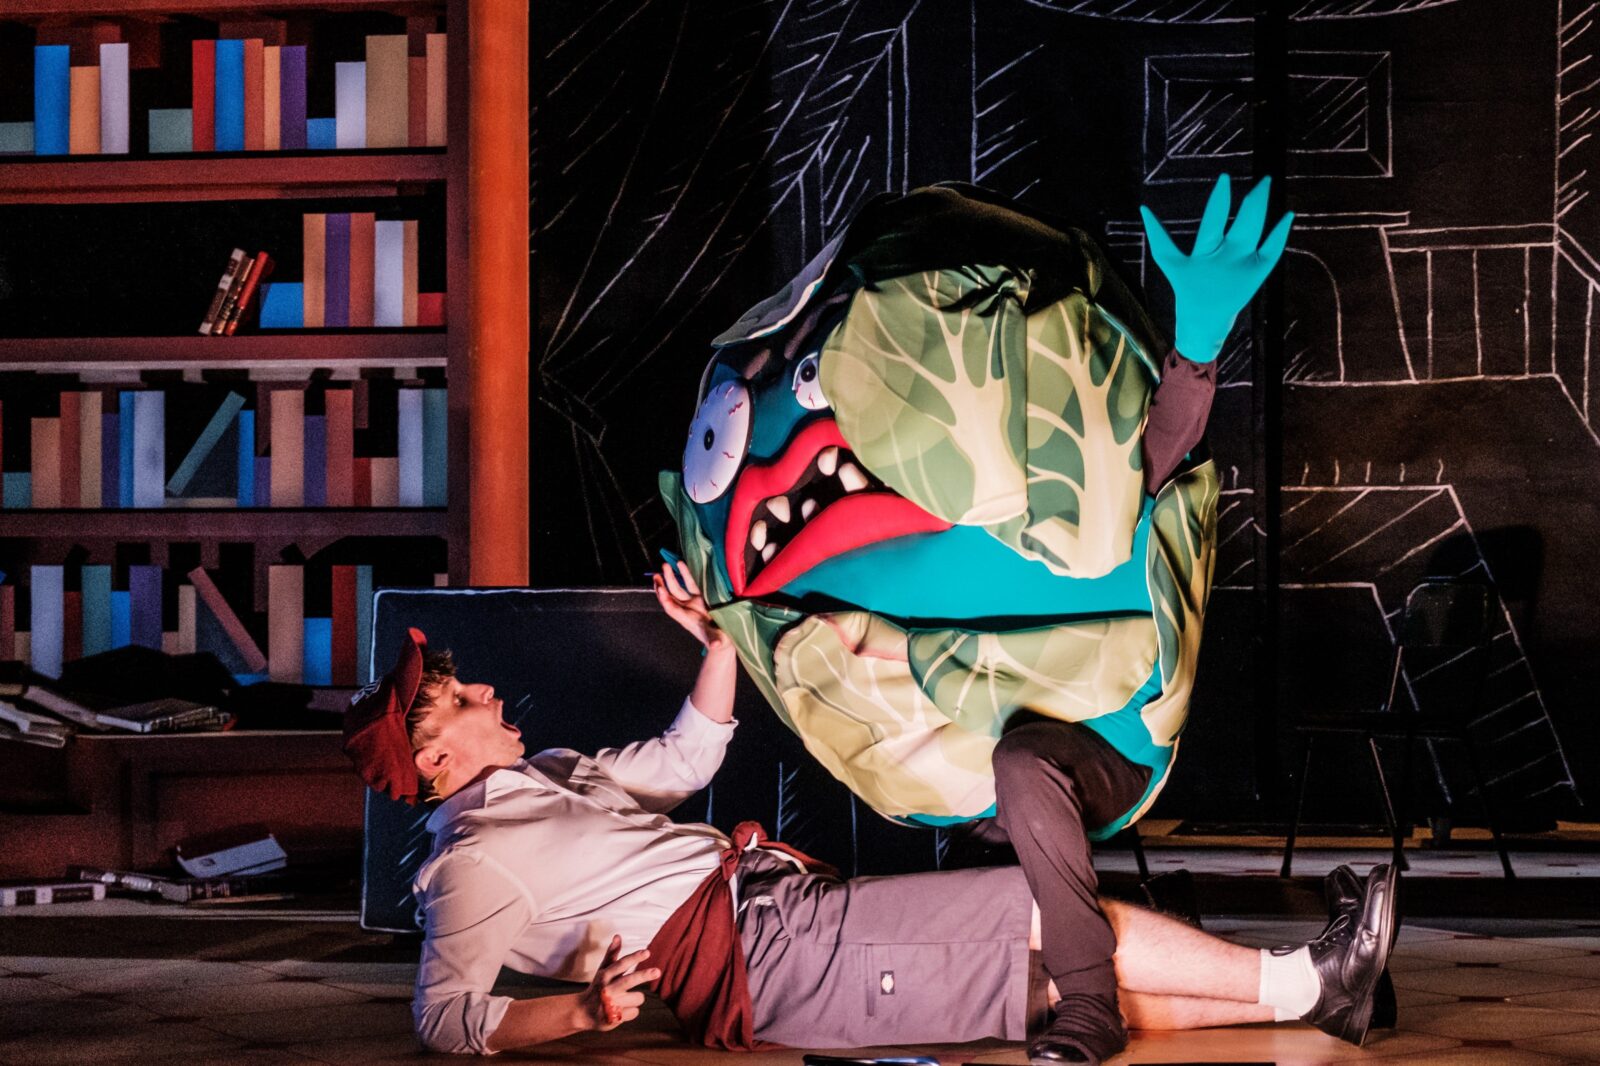 A person in a scary lettuce costume stands over a man lying on the floor dressed as a school boy.